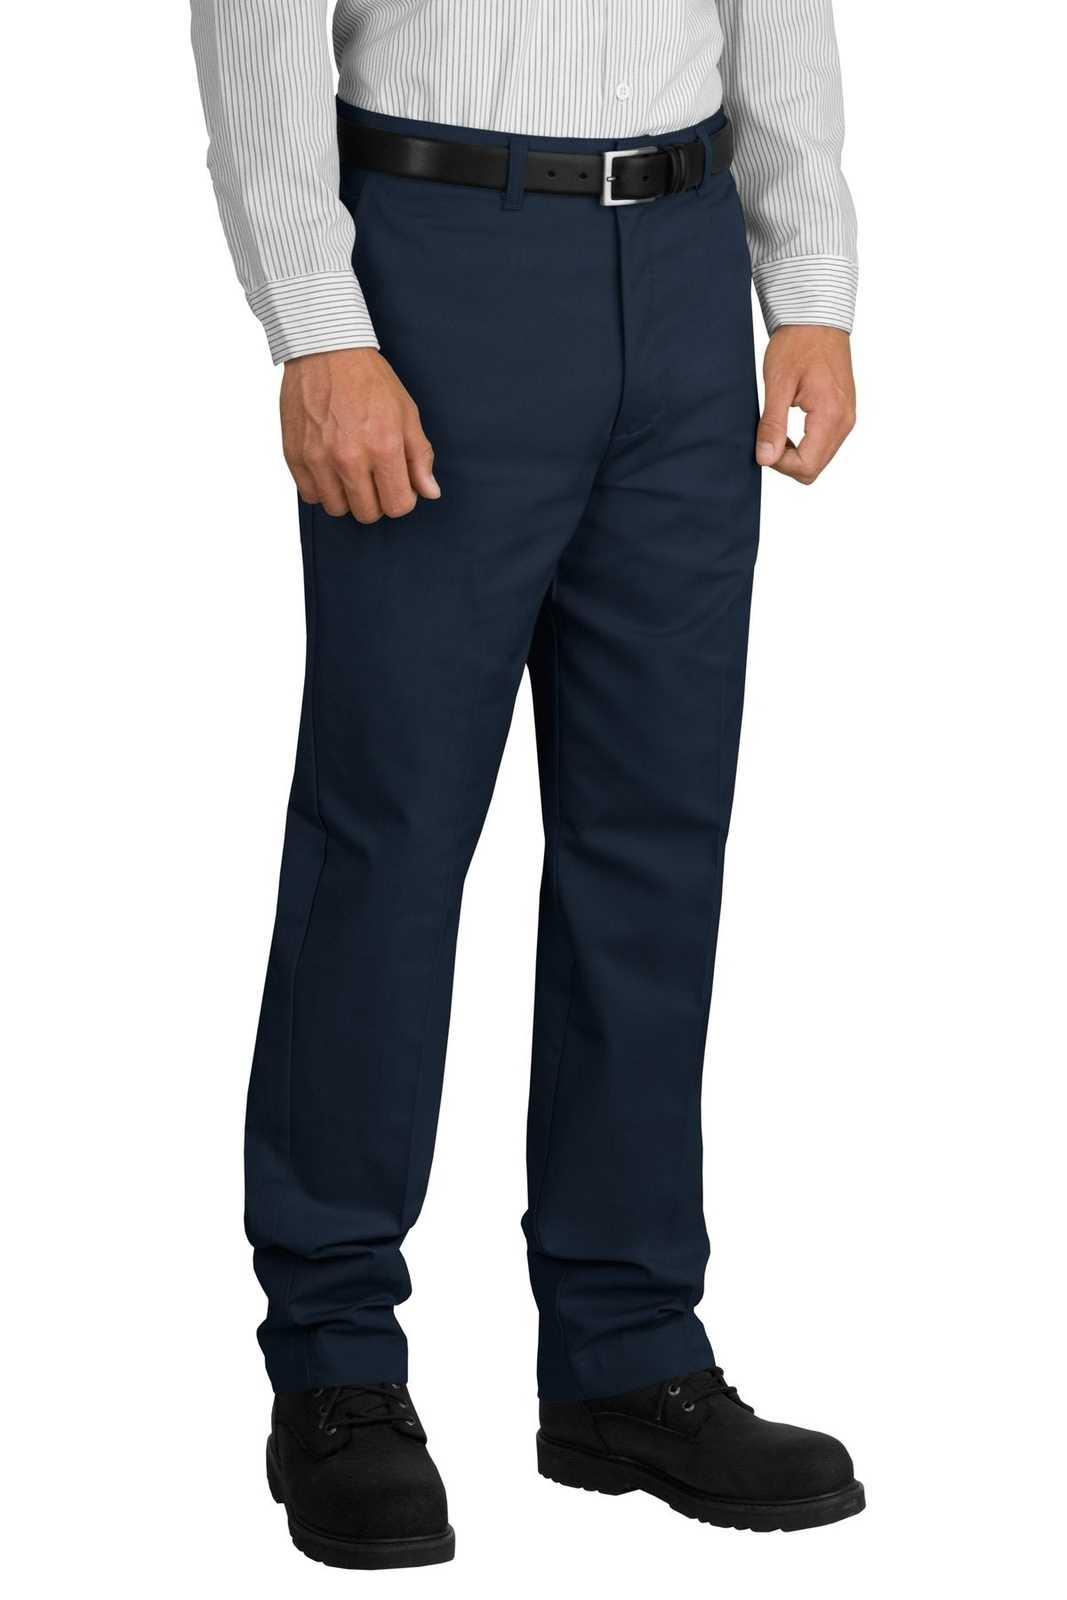 Red Kap PT20 Industrial Work Pant - Navy - HIT a Double - 1